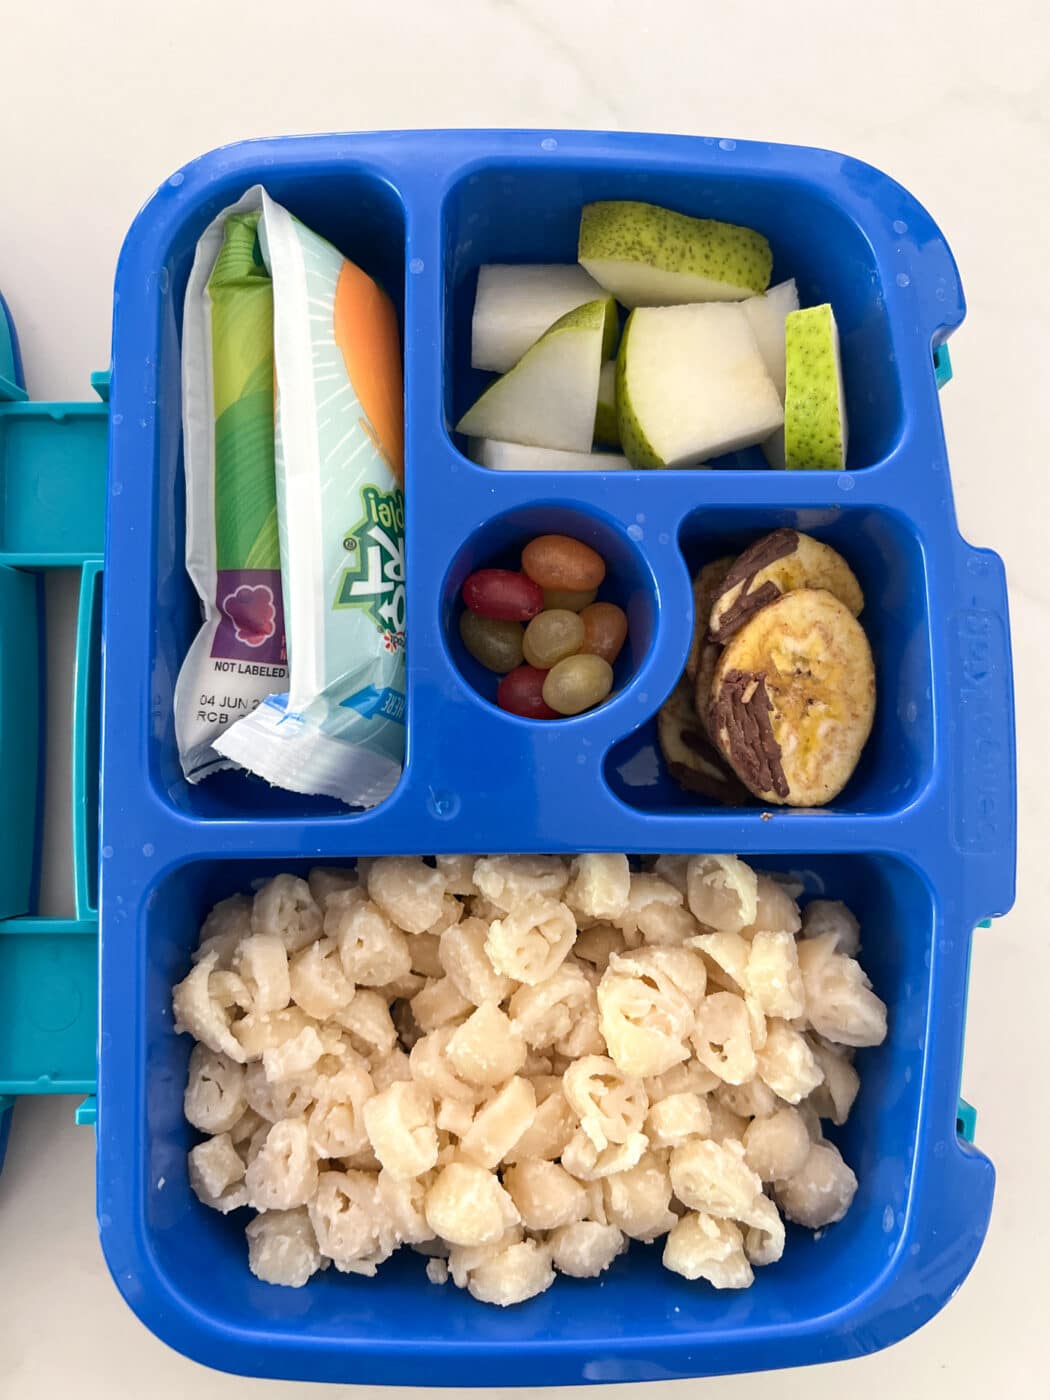 Ideas for Bentgo lunchbox lunches.